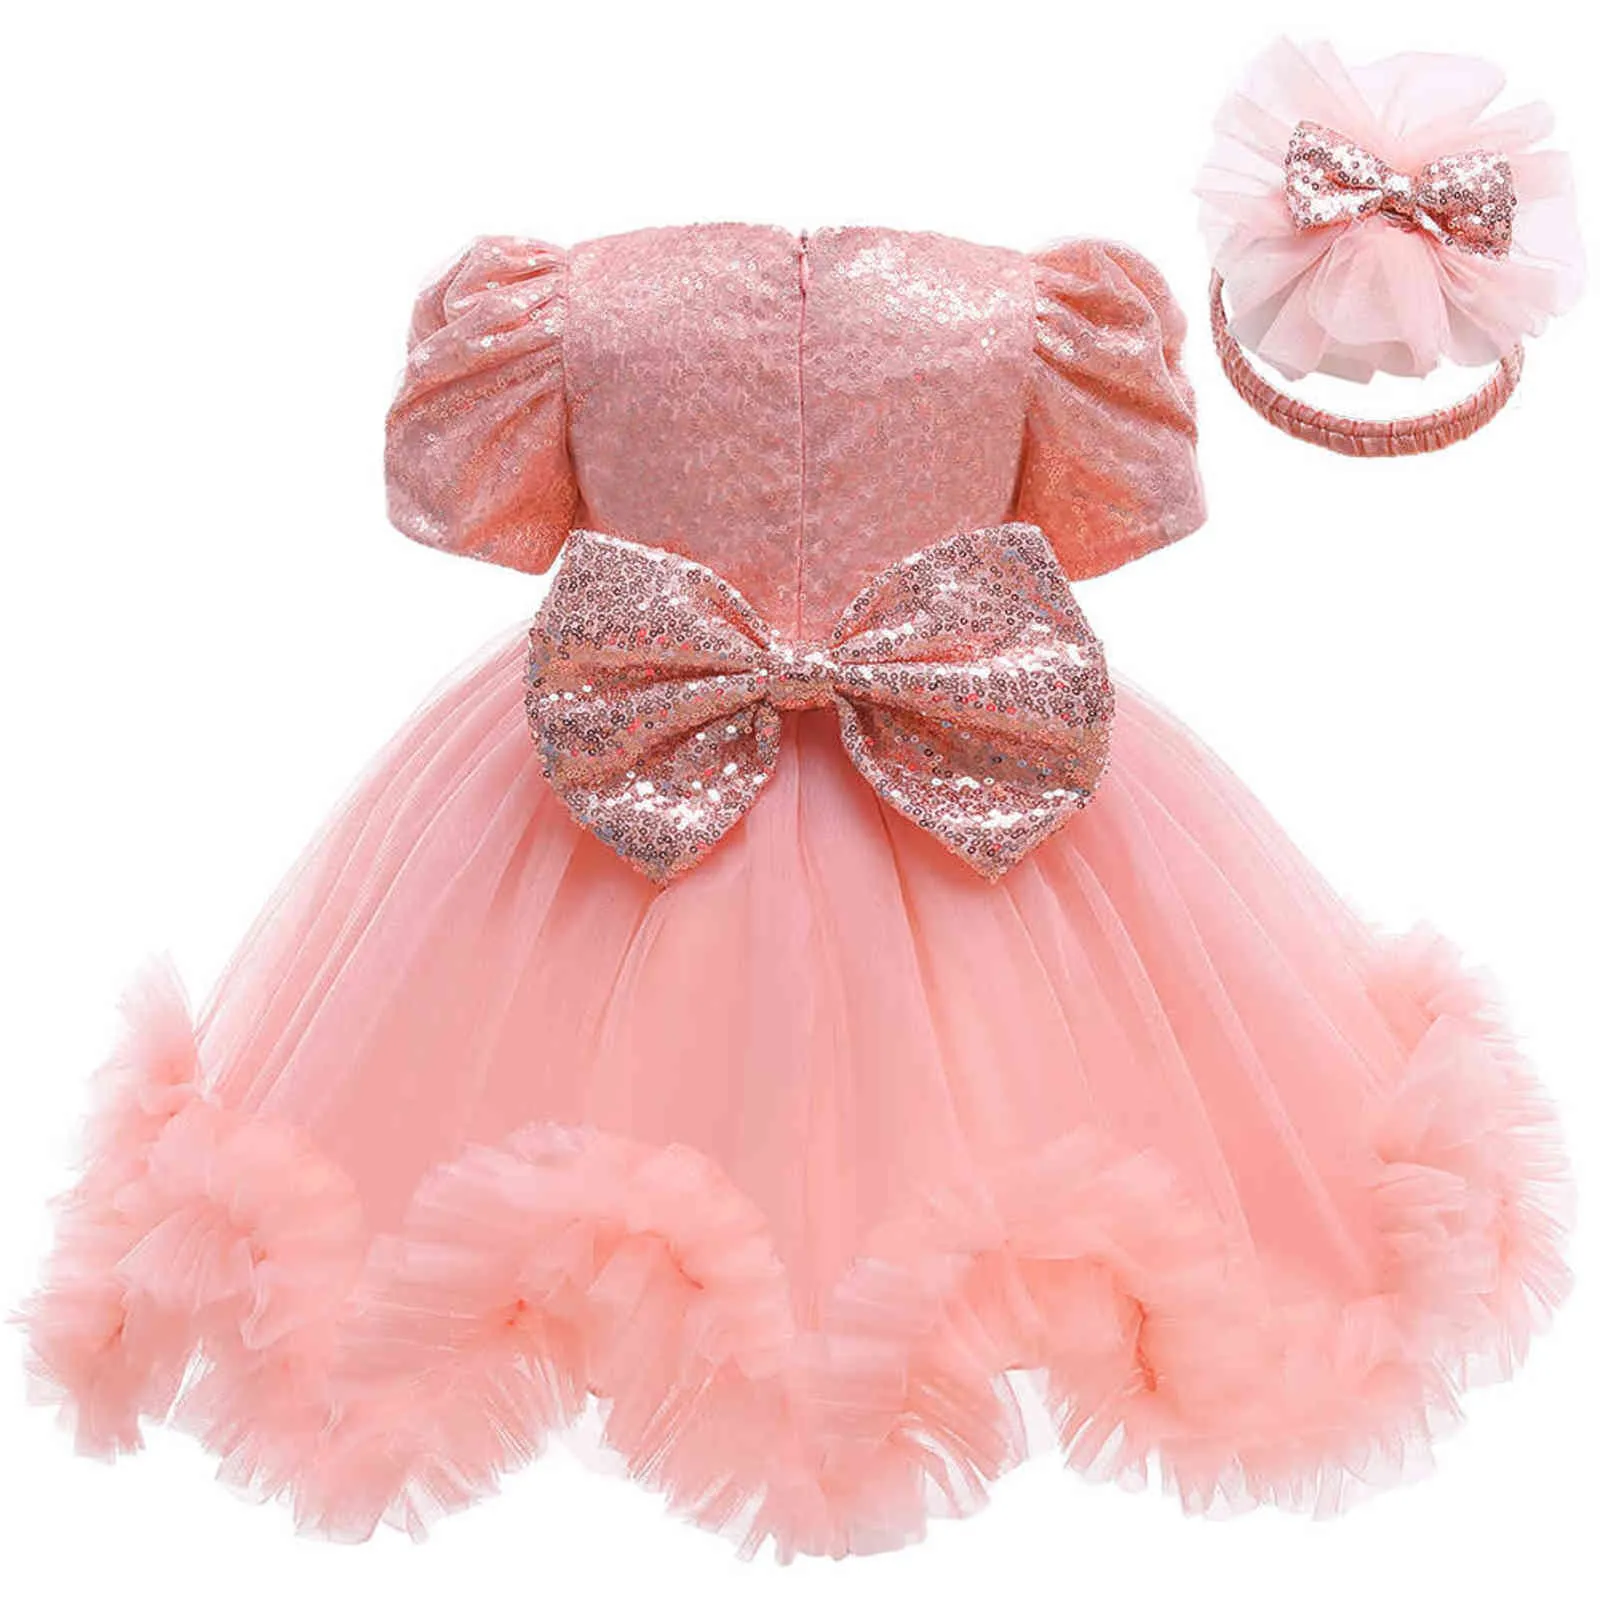 LZH Infant Christmas Dresses For Baby Girls Lace Princess Dress Baby 1st Year Birthday Dress Baptism Party Dress Newborn Clothes G1129